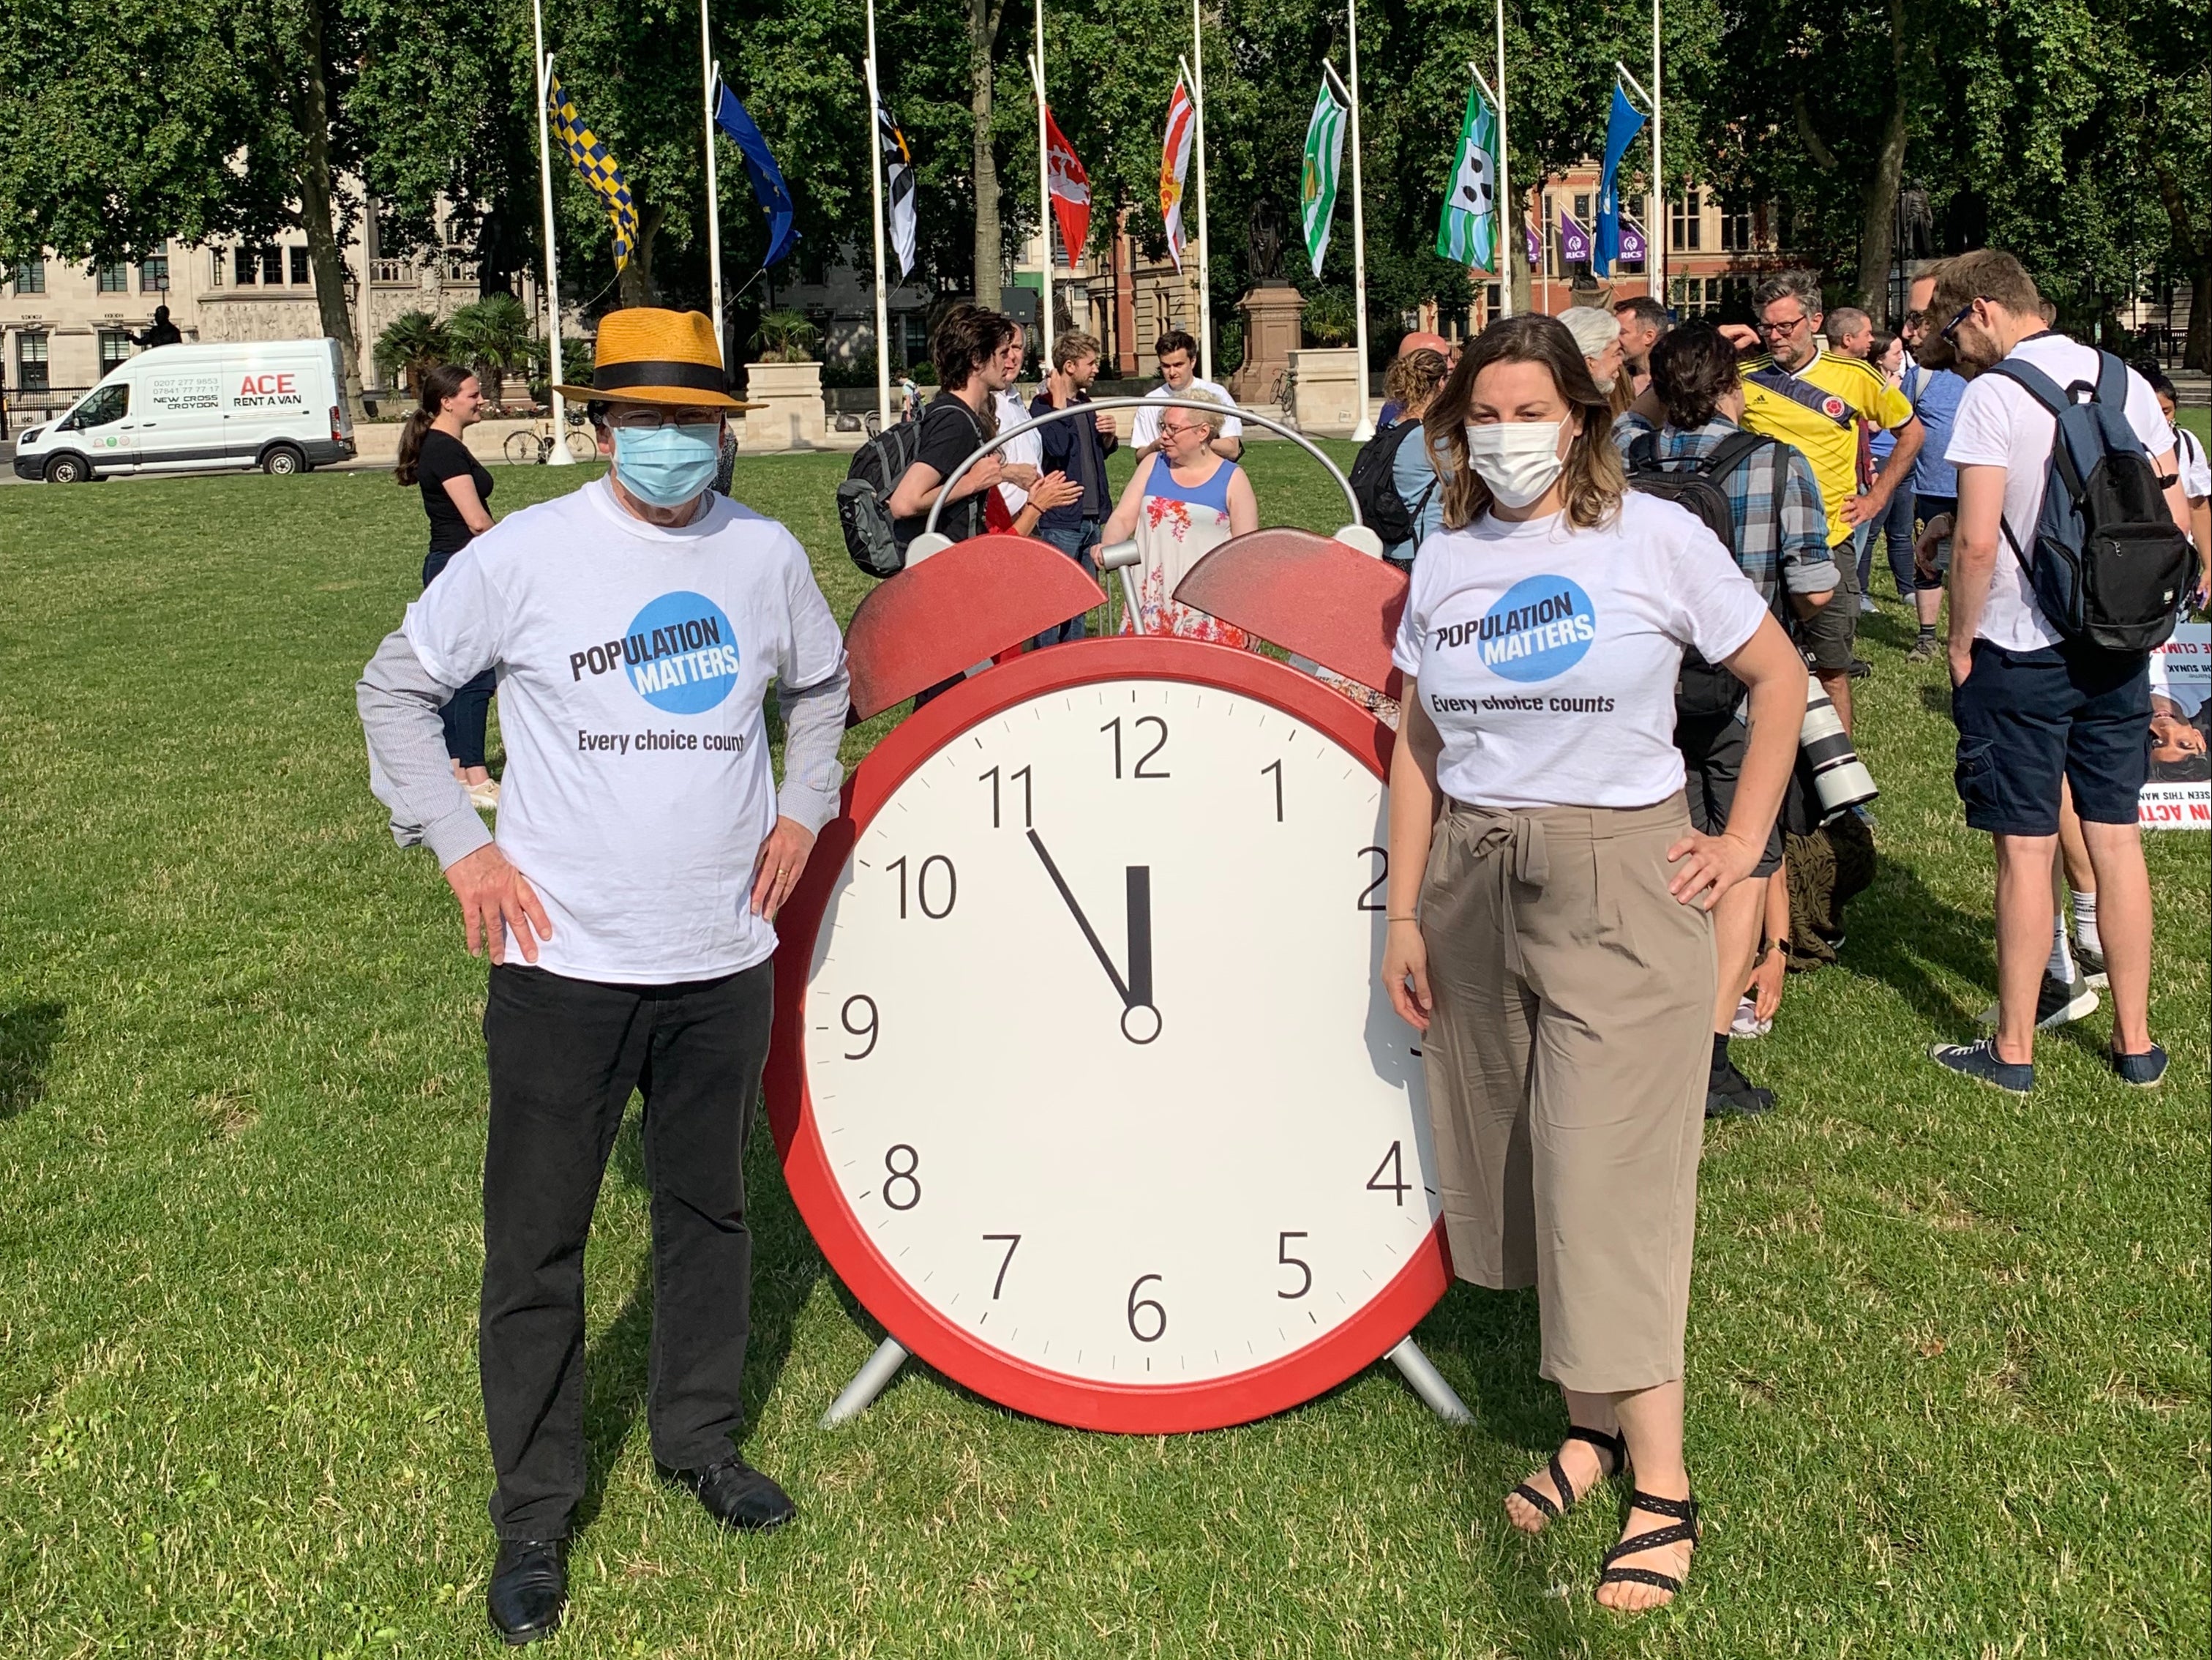 Attendees stand behind lifesize alarm clocks, designed to show time is running out in the climate emergency